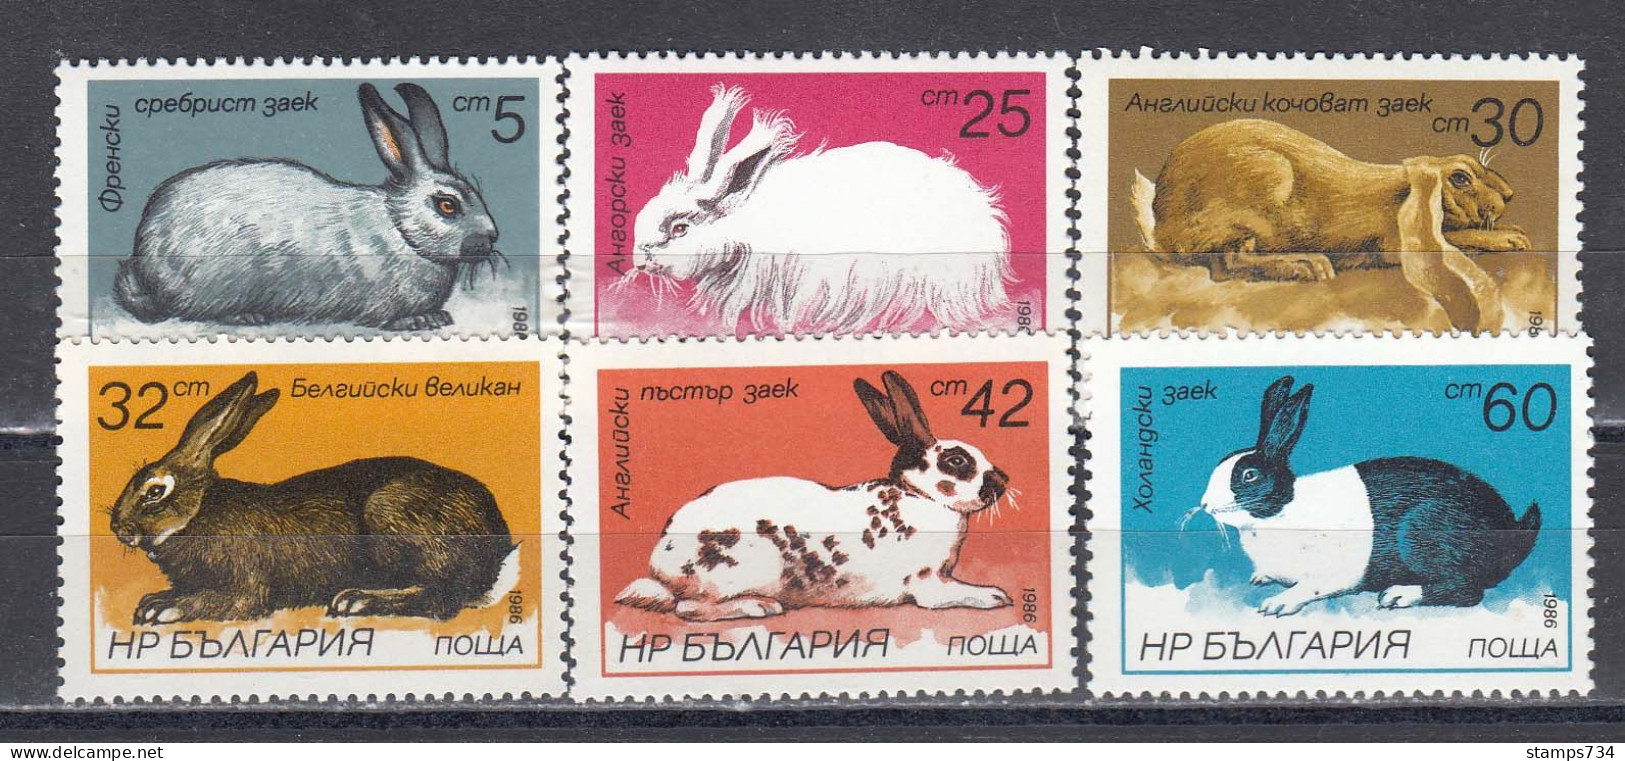 Bulgaria 1986 - Rabbits - Different Races, Mi-Nr. 34447A/52A, Perforated, MNH** - Ungebraucht